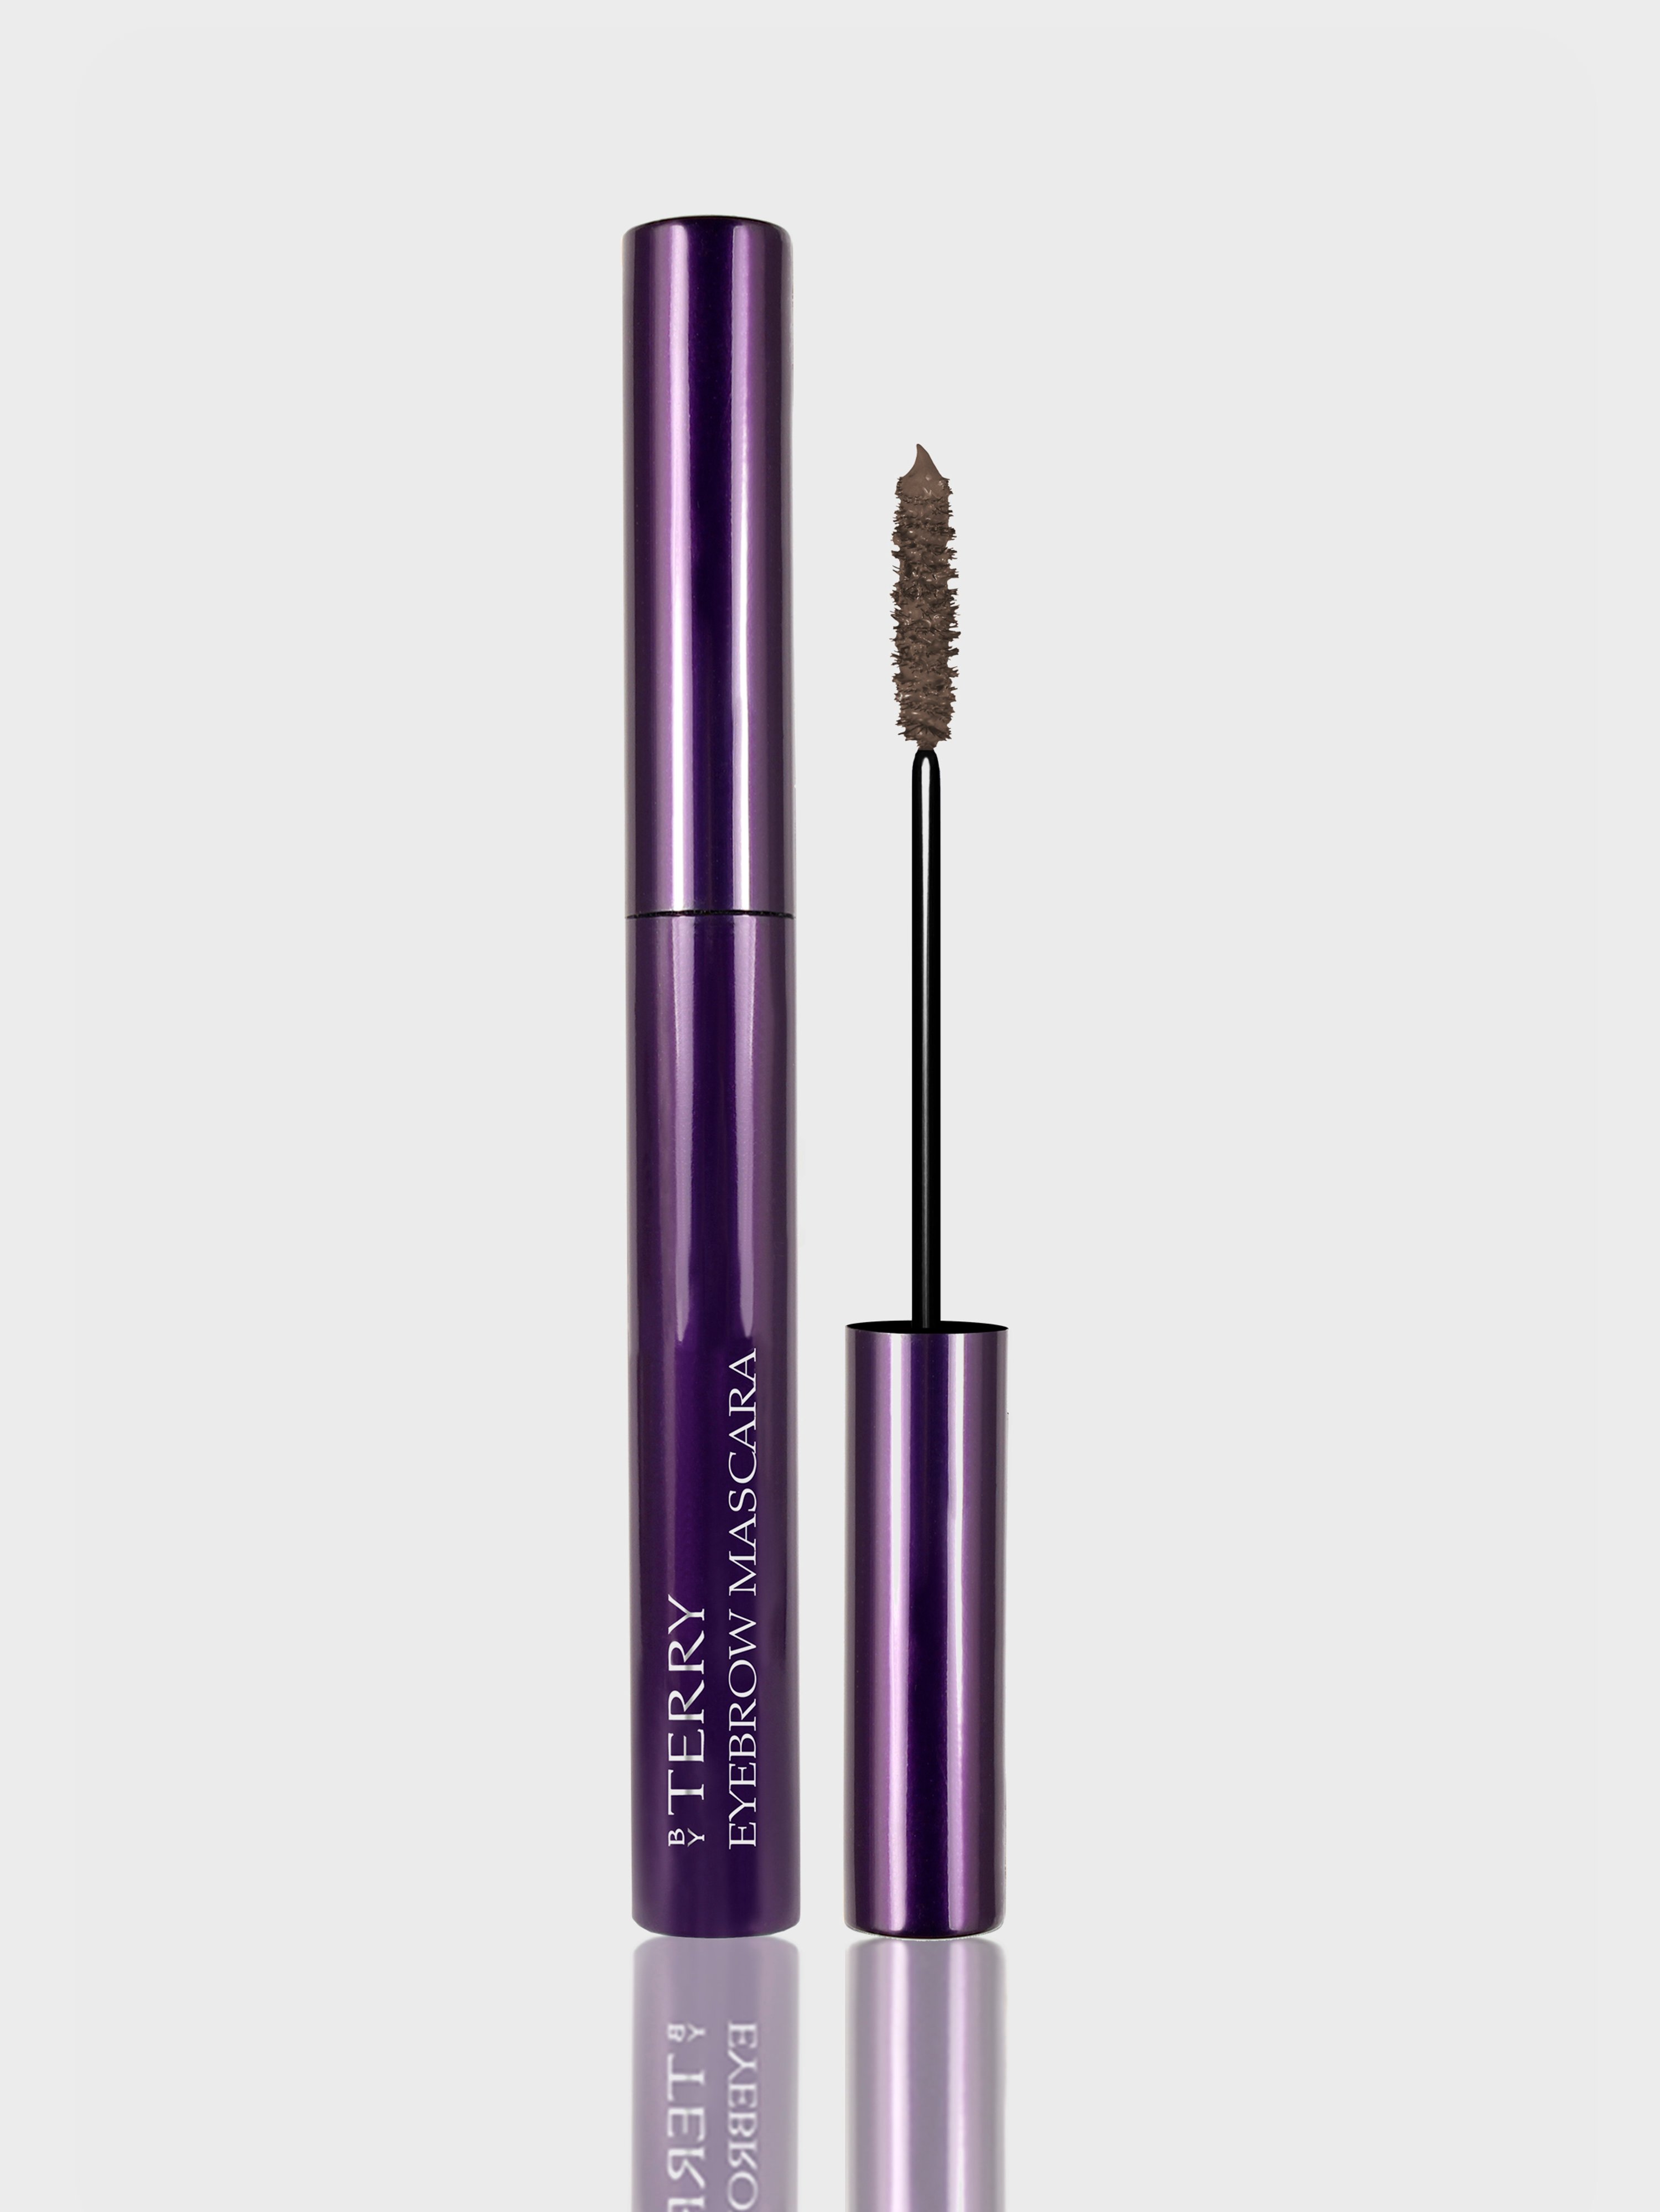 BY TERRY BY TERRY EYEBROW MASCARA TINT BRUSH FIX-UP GEL